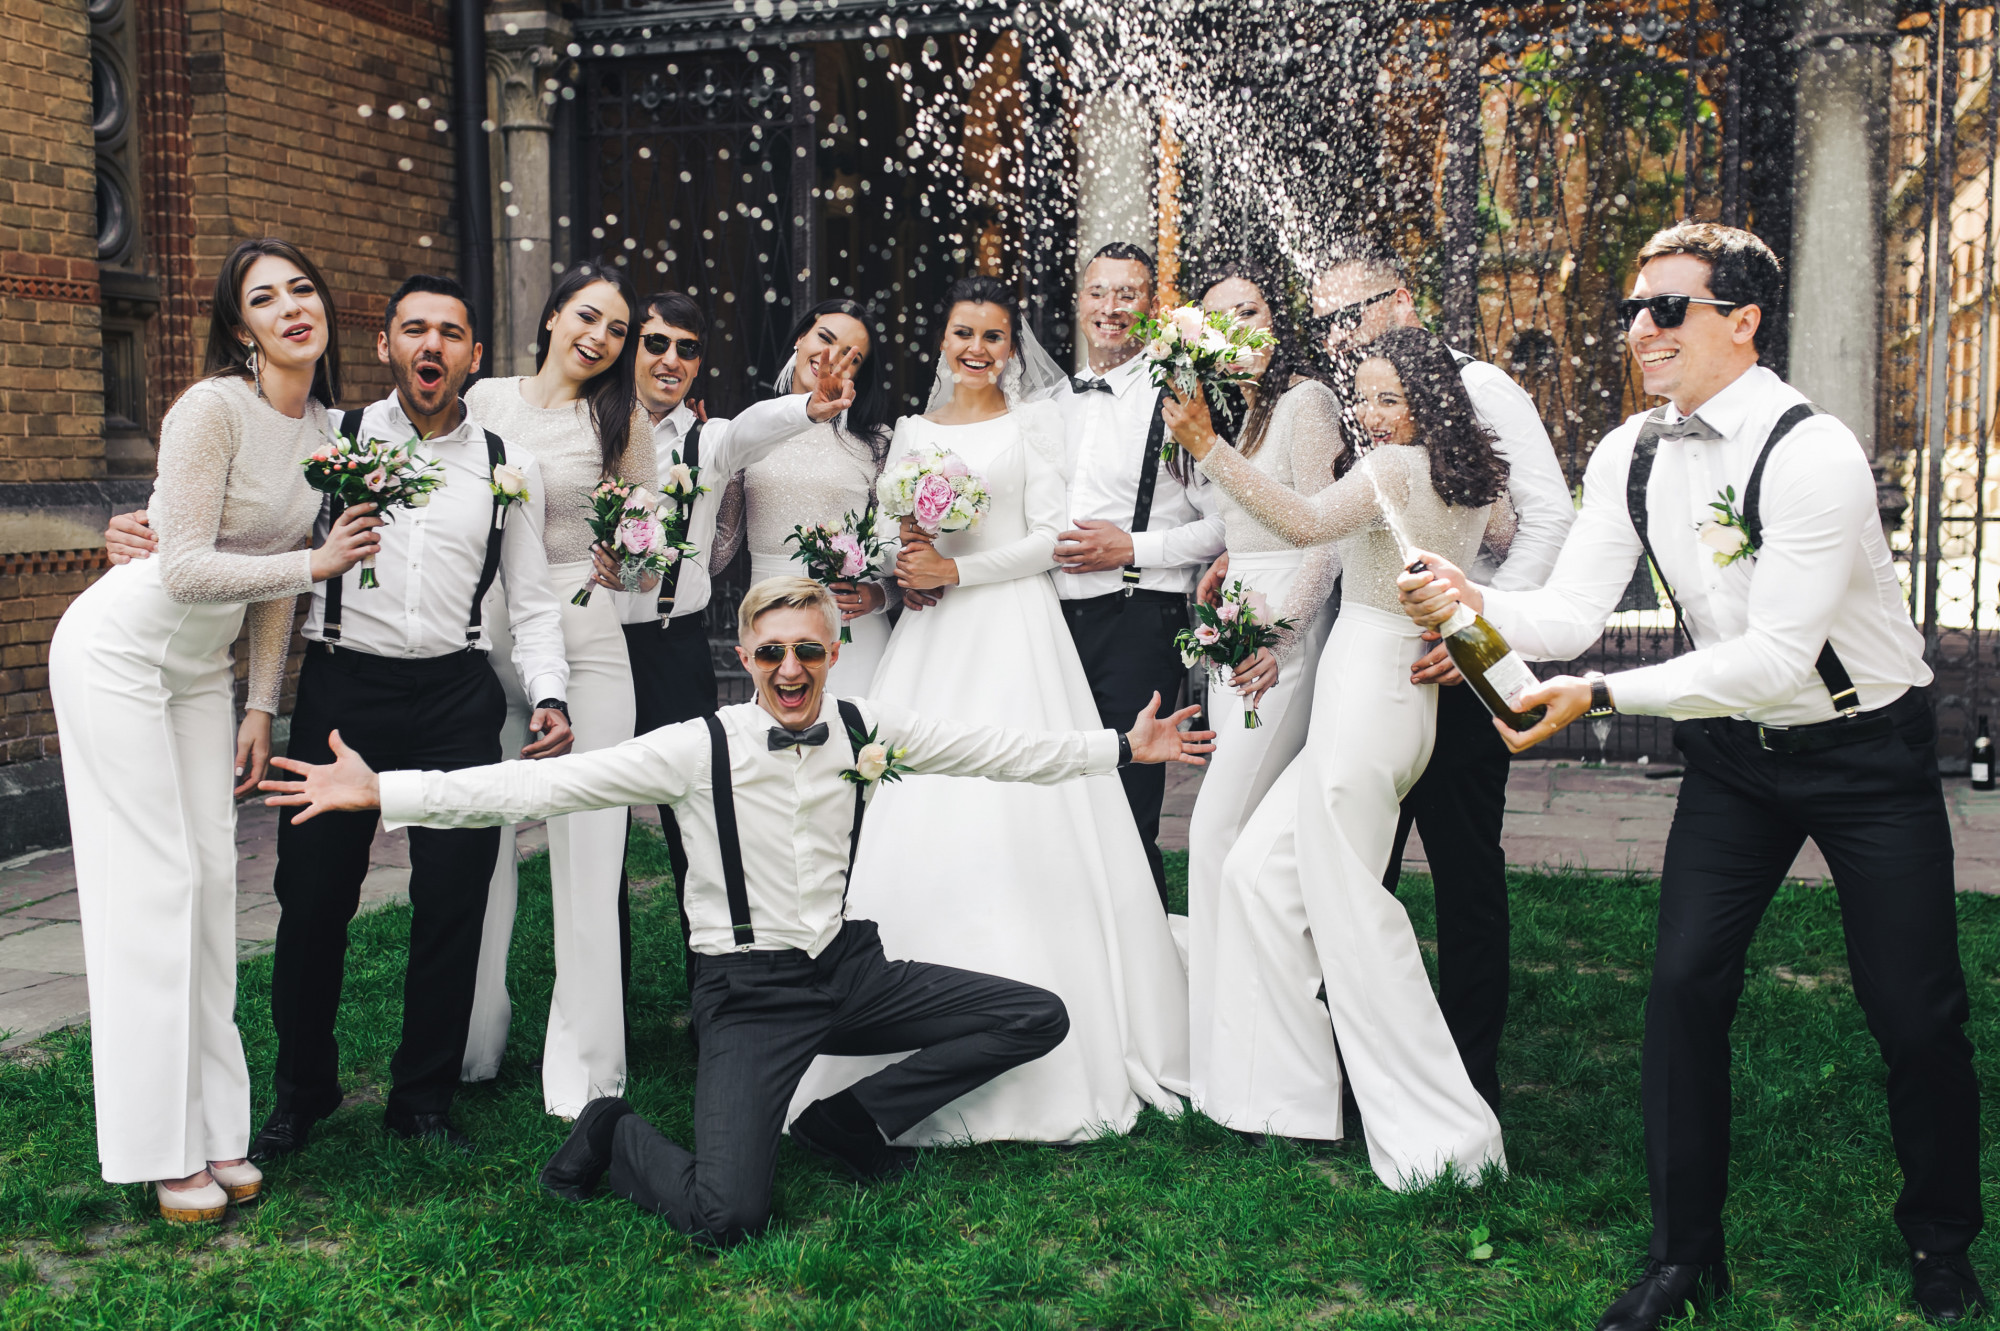 Group Of People Celebrating A Wedding